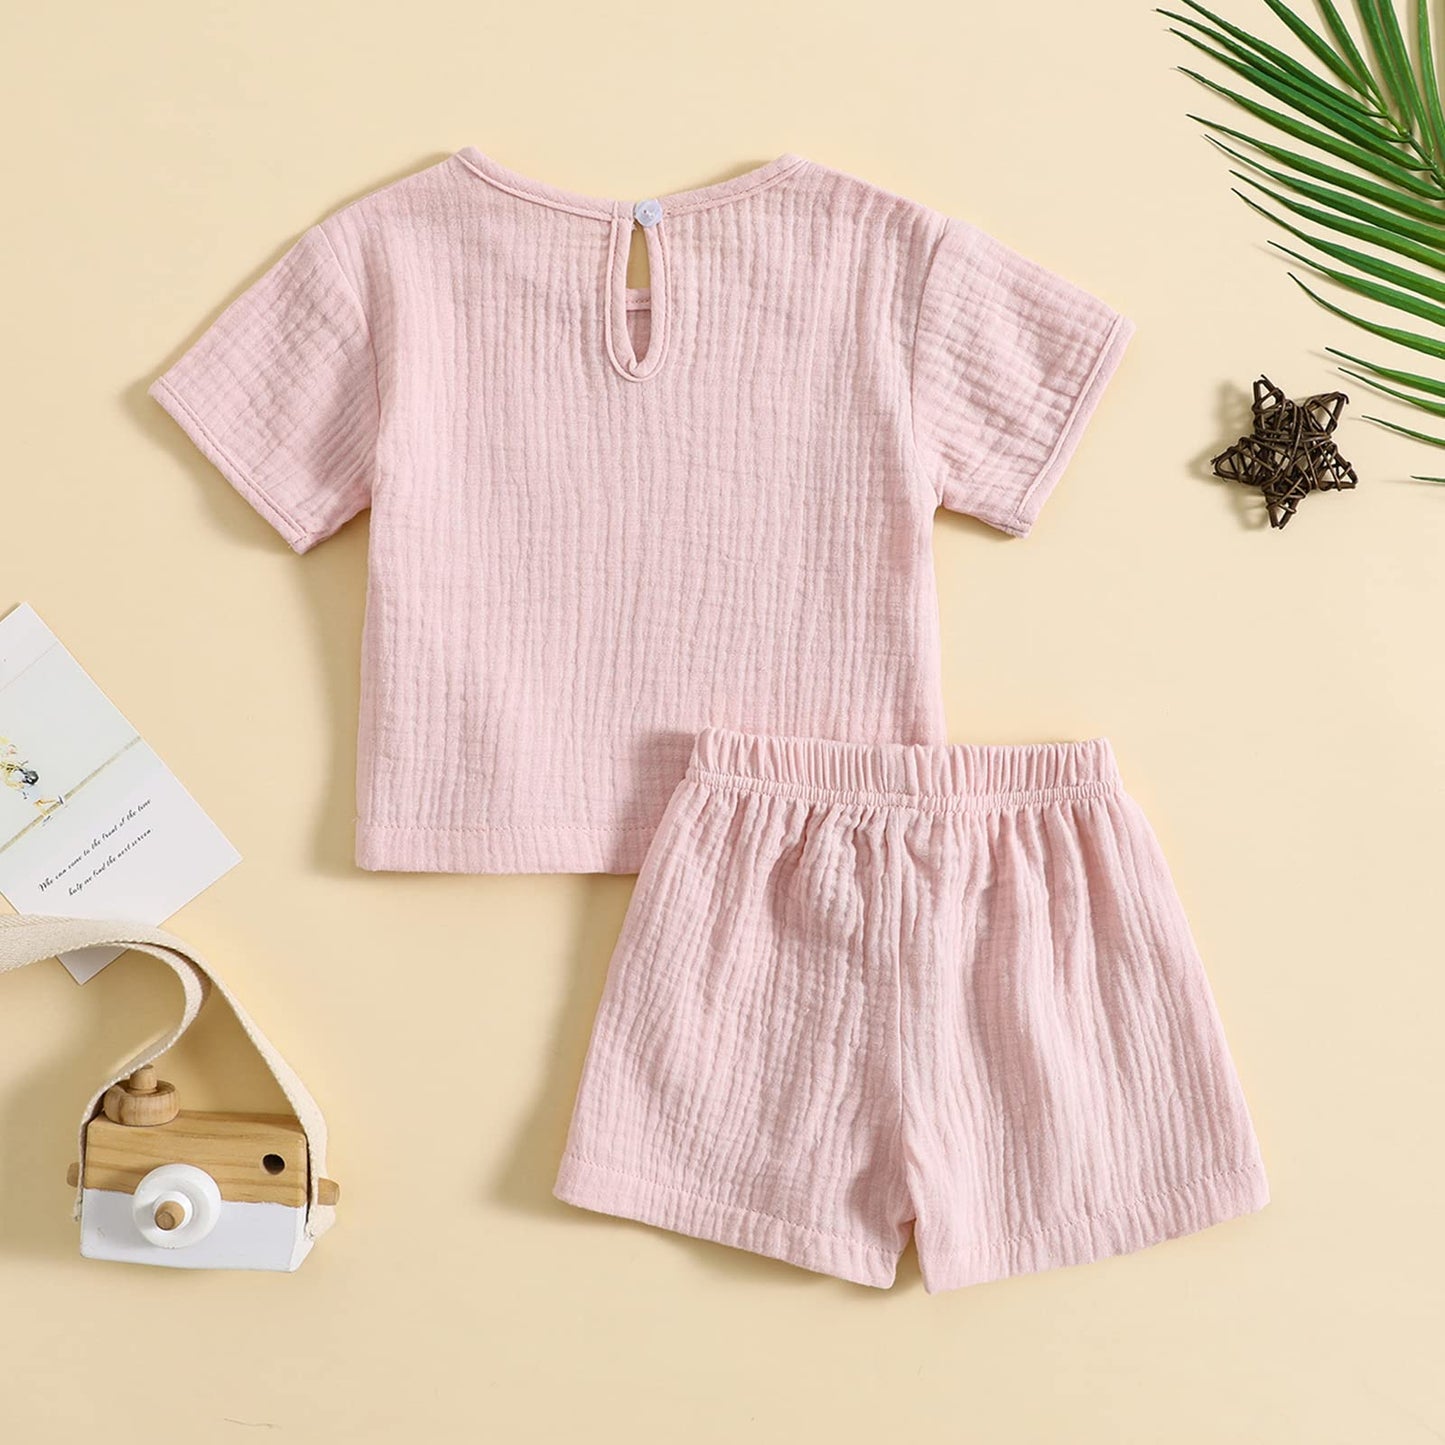 Toddler Baby Boy Girl Cotton Linen Outfit Short Sleeve T-Shirt Tops Elastic Shorts Set 2Pcs Casual Summer Clothes (0-6 Months)